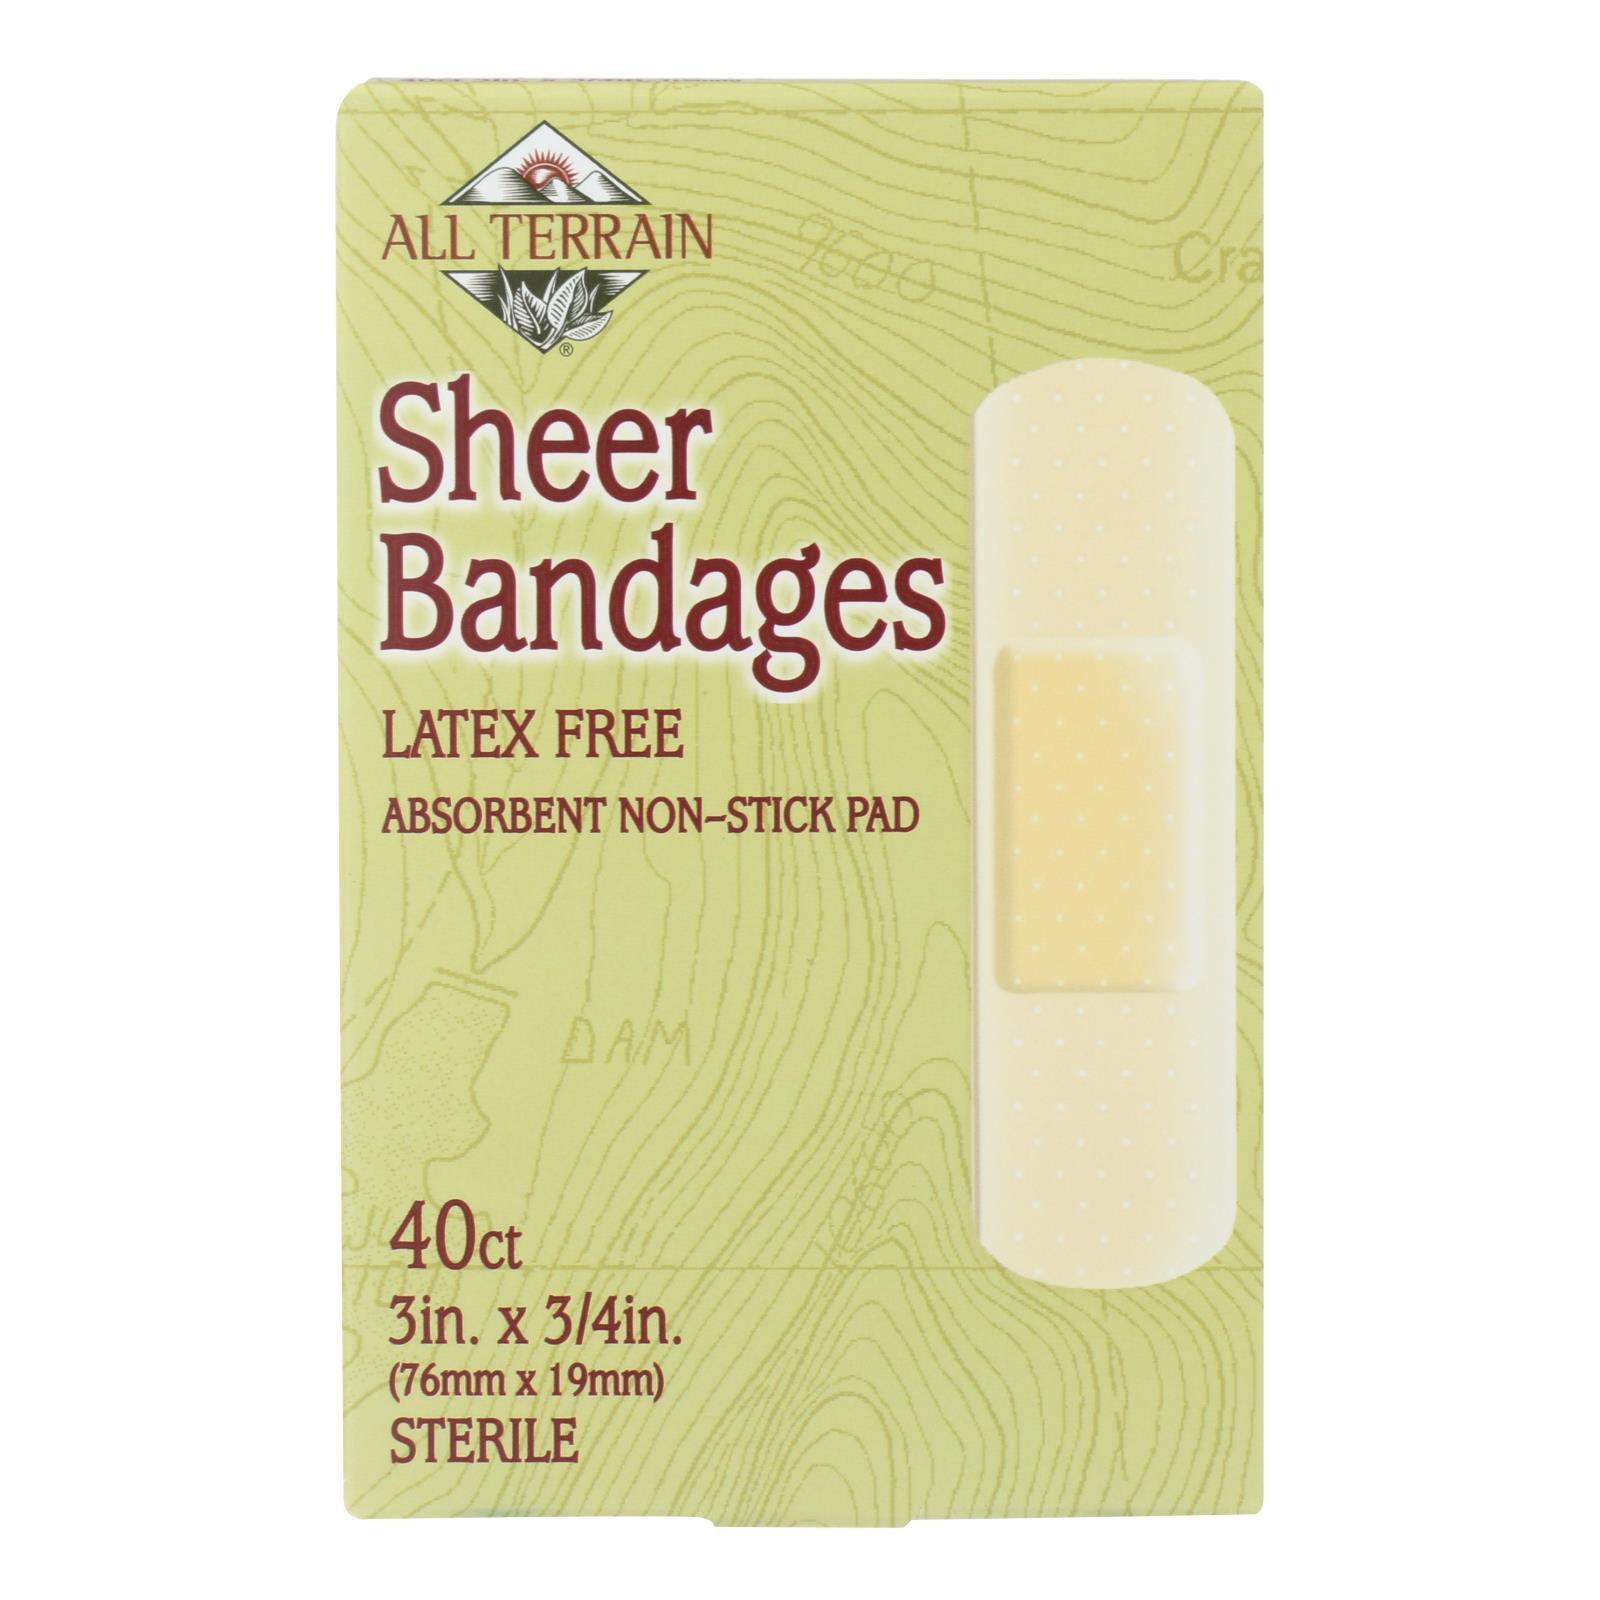 Save on CareOne Bandages Sheer with Non-Stick Pad Assorted Sizes